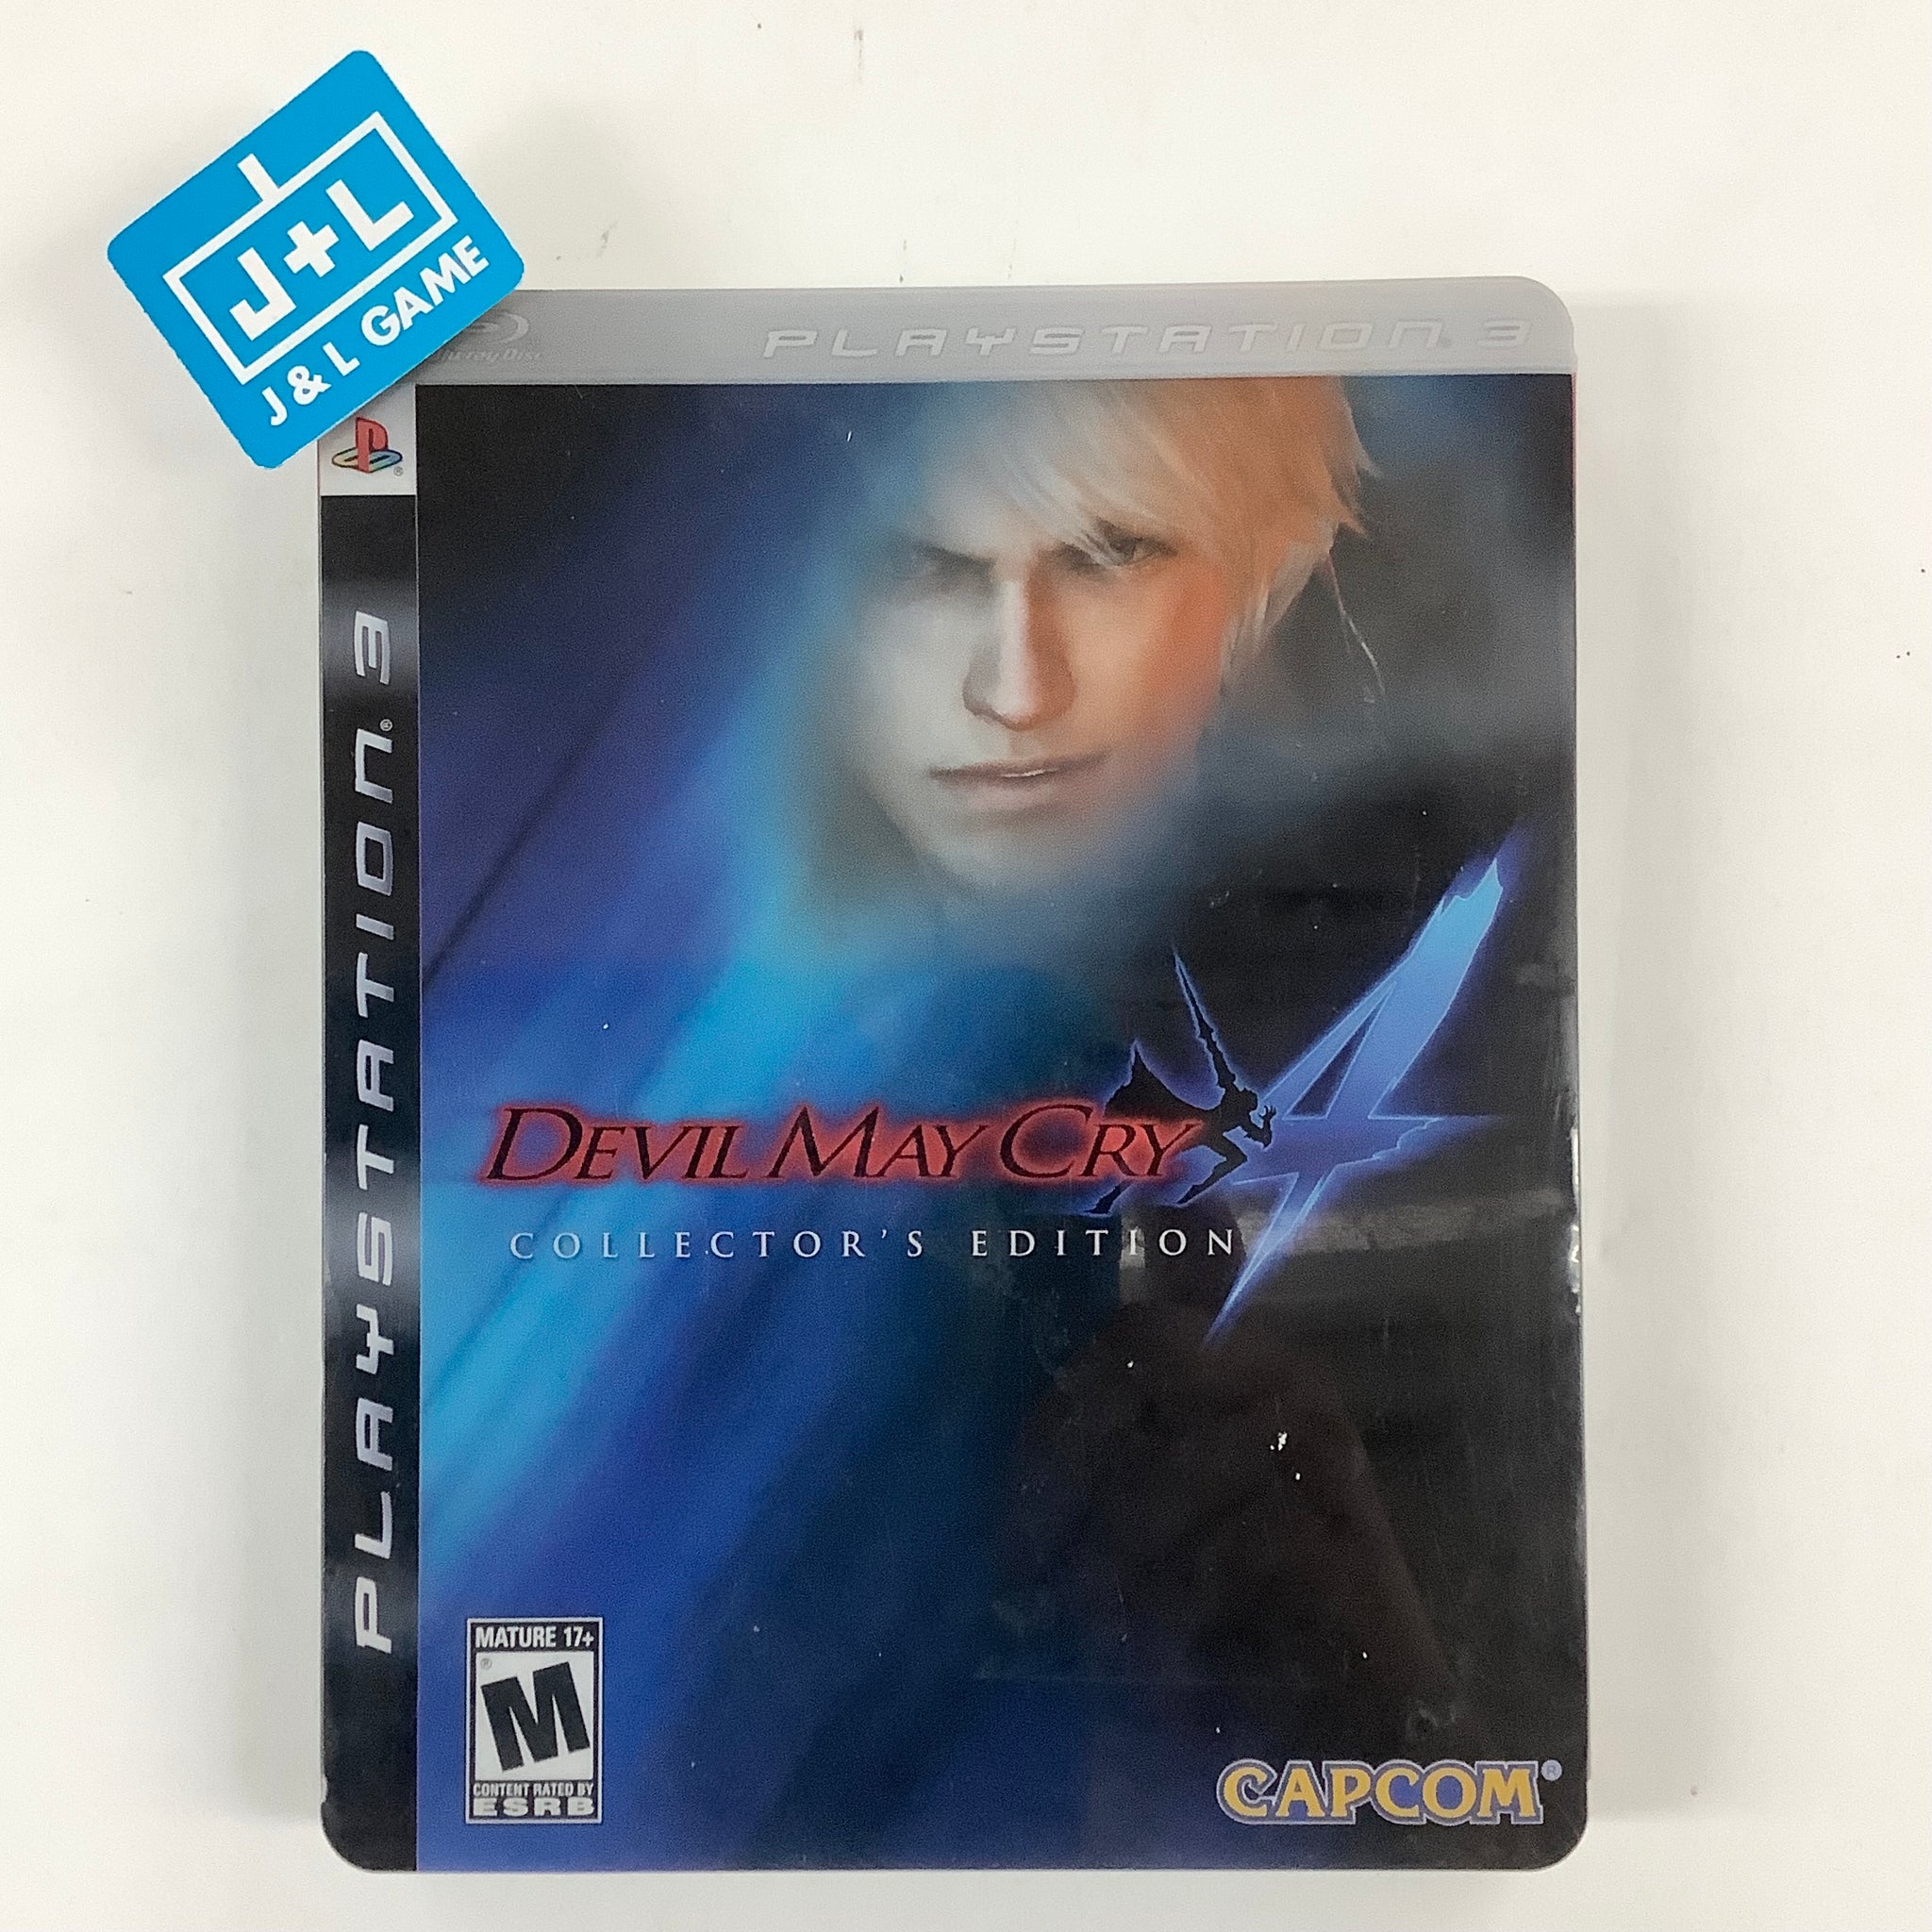 Capcom Shares New Details on Devil May Cry 4 Special Edition